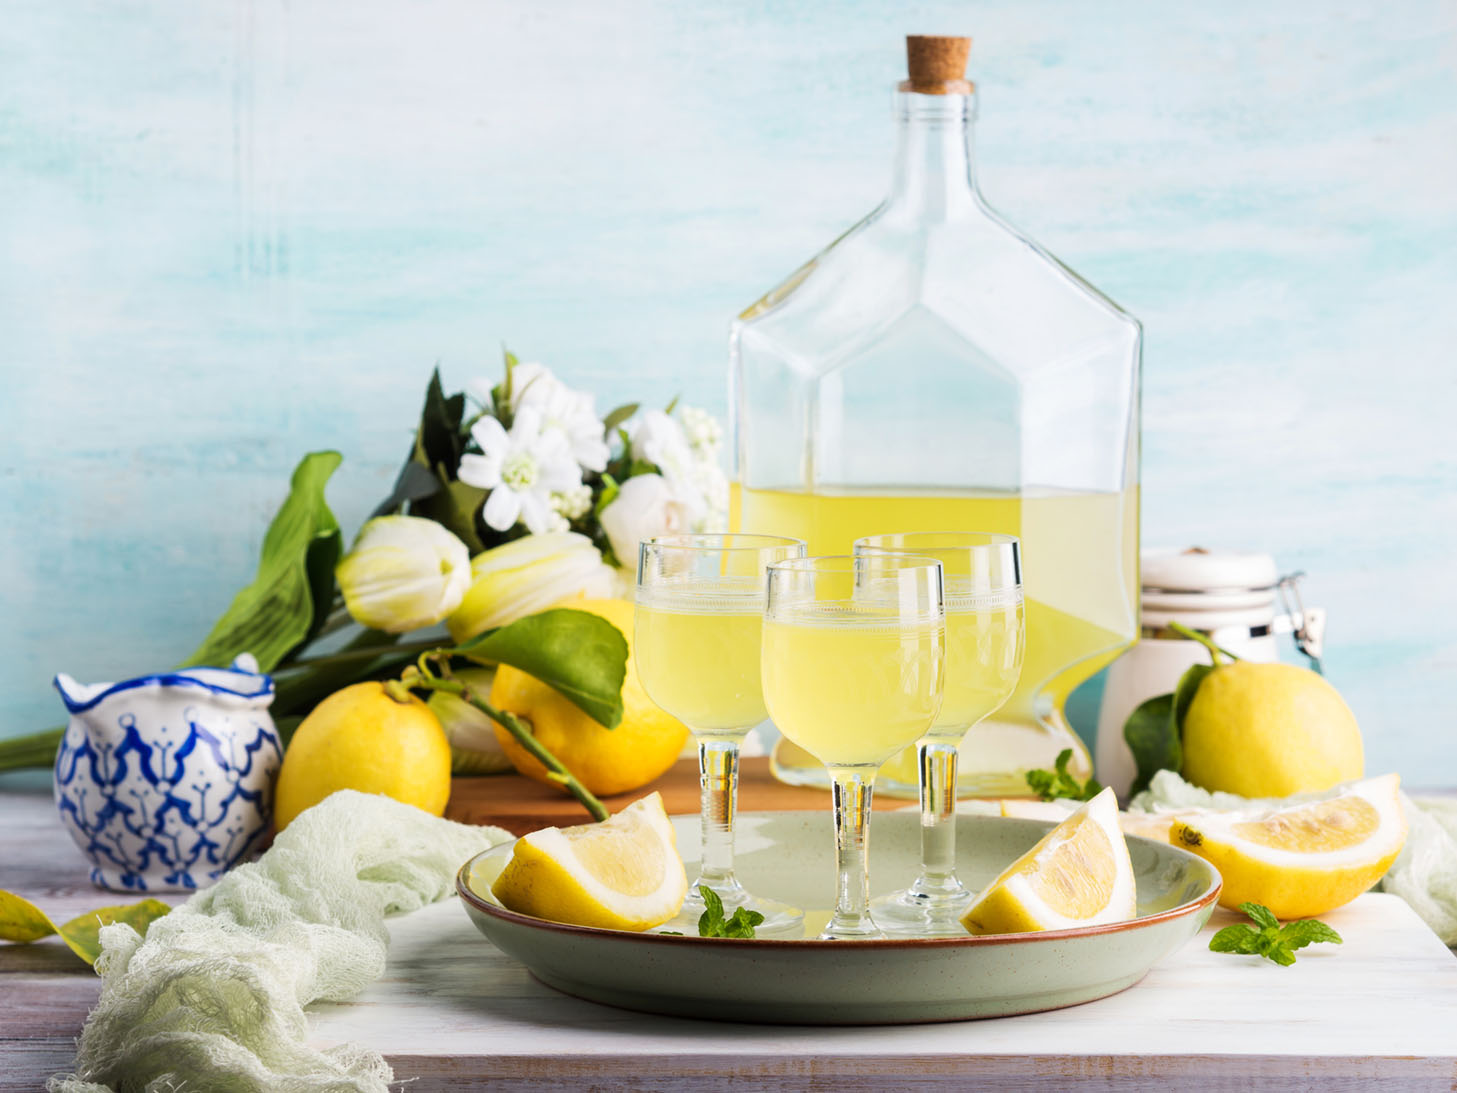 vignette with glass jug of homemade limoncello, stemmed glasses of limoncello on a tray, sliced lemons, white flowers, a canister of sugar, and a small blue-and-white porcelain vessel